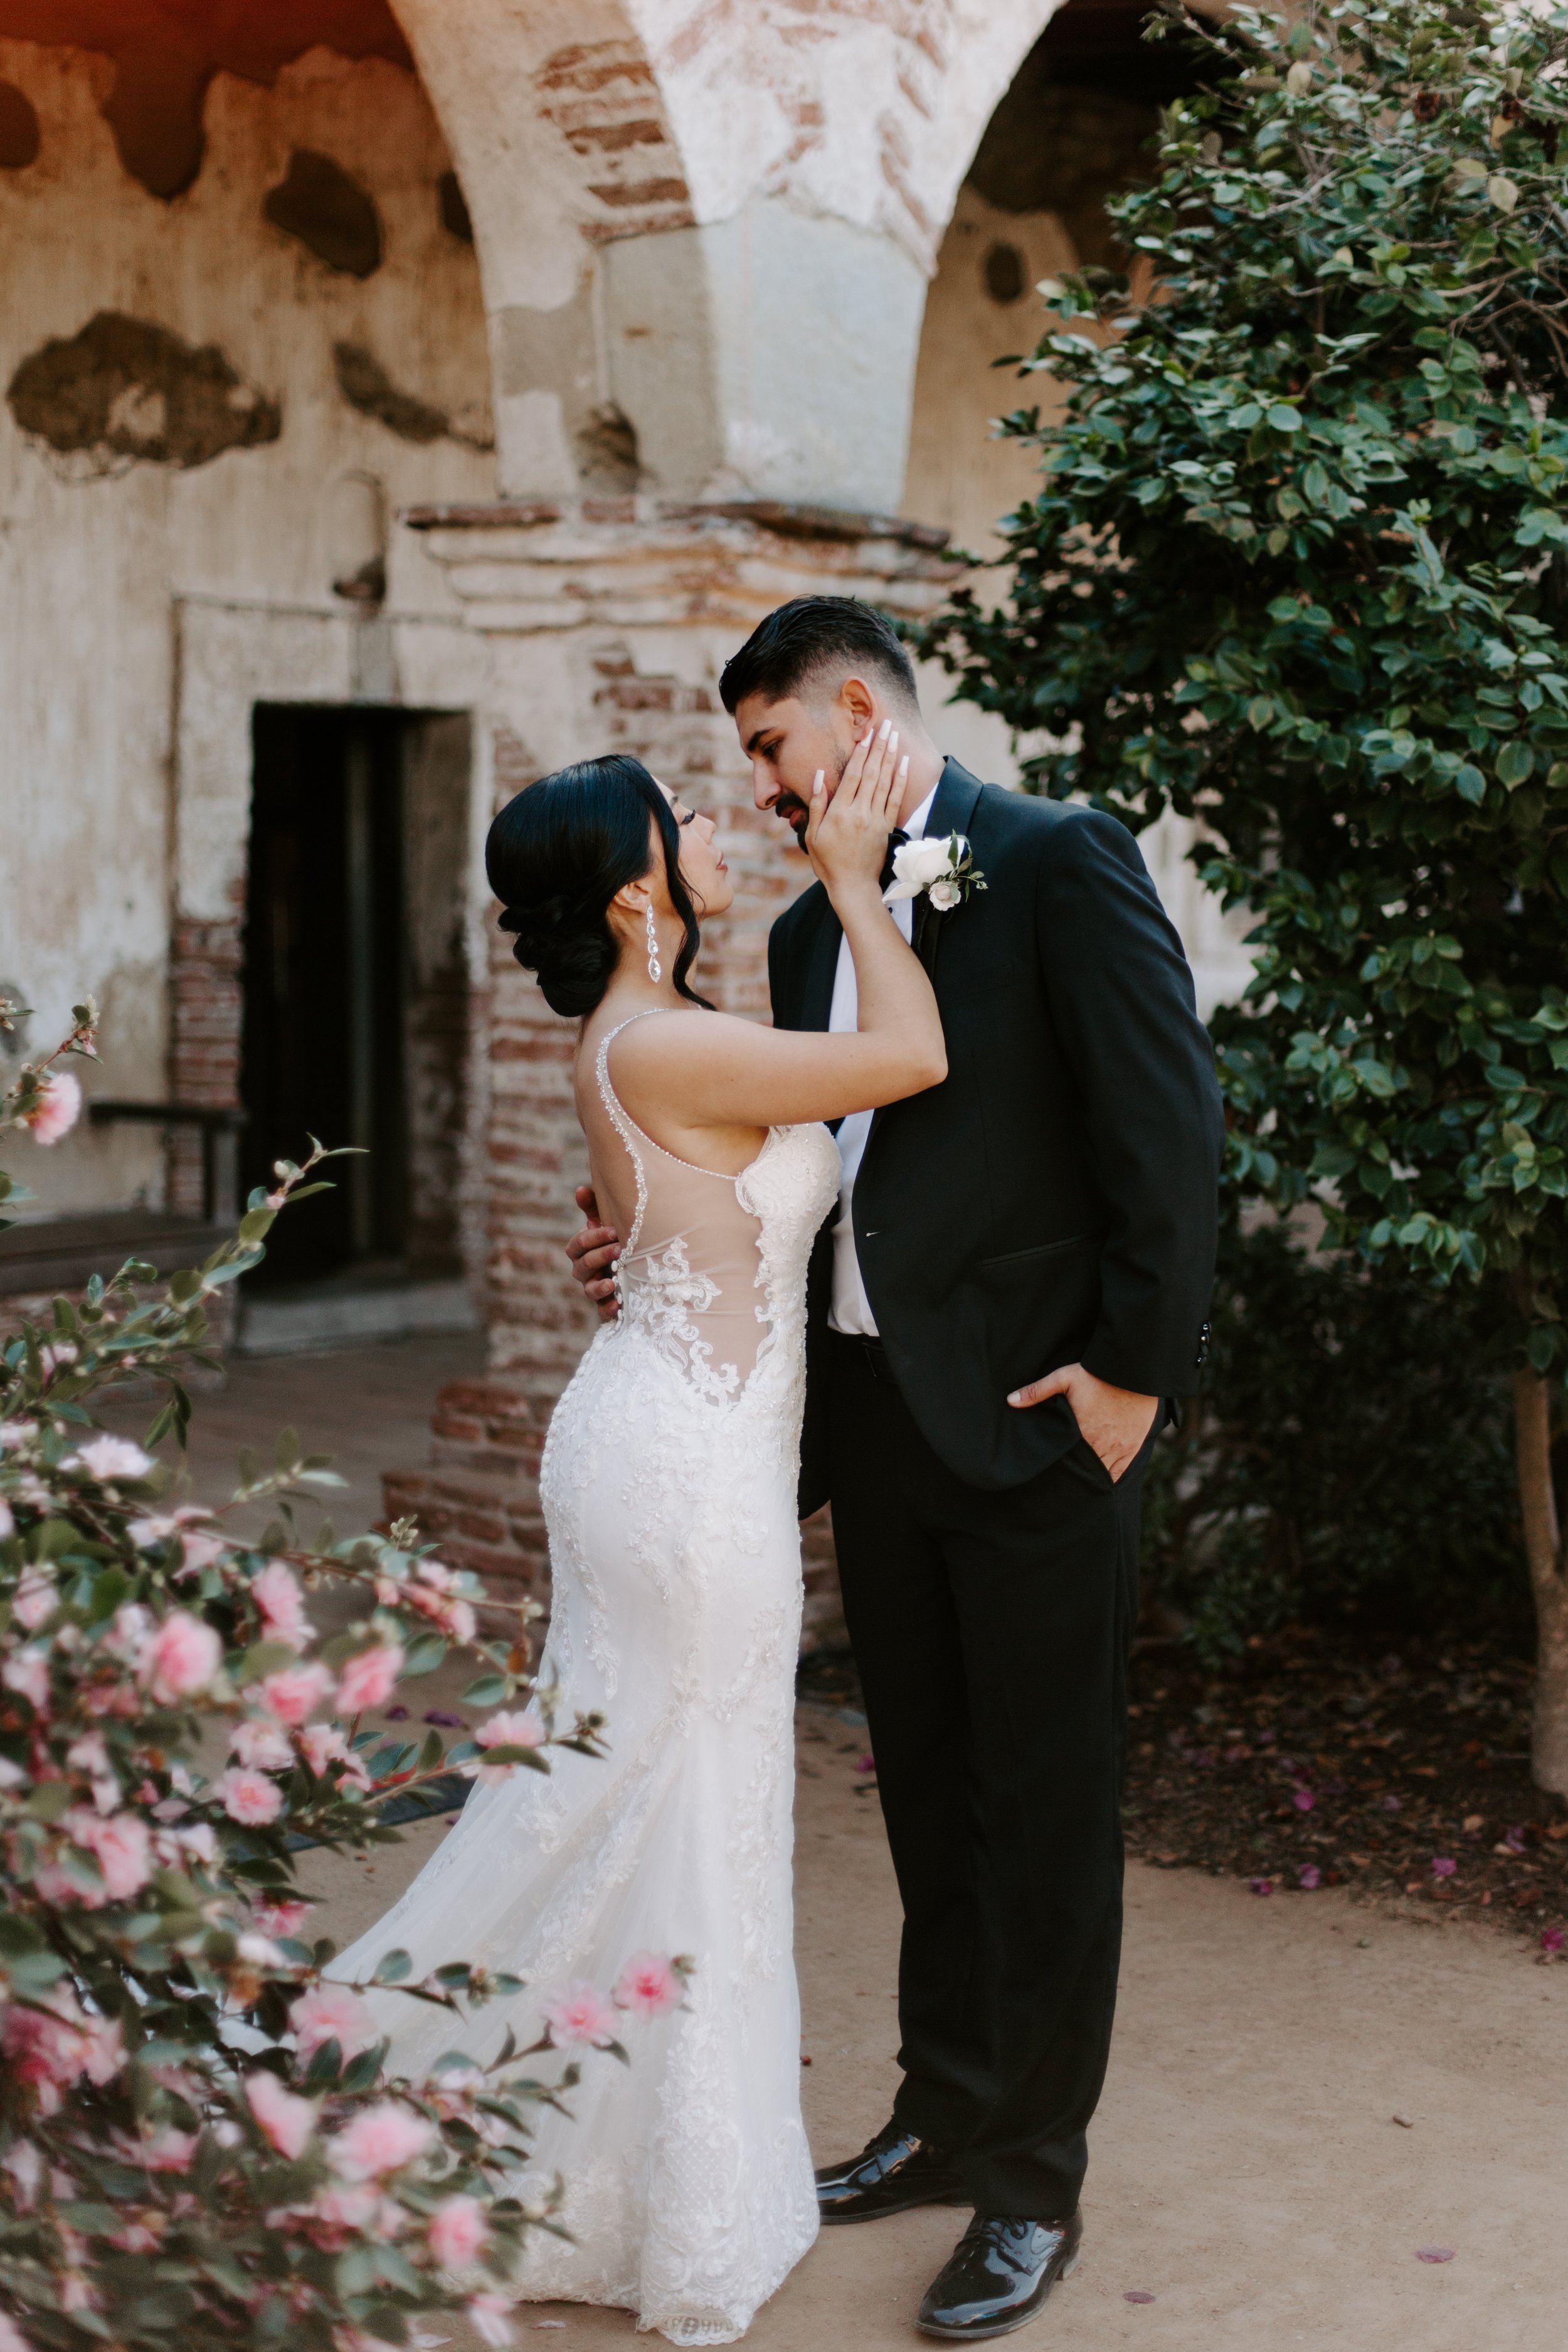 Ashley and Andrew Wedding at the San Juan Capistrano Mission and the Franciscan Gardens by Kara Reynolds Photography260.jpg